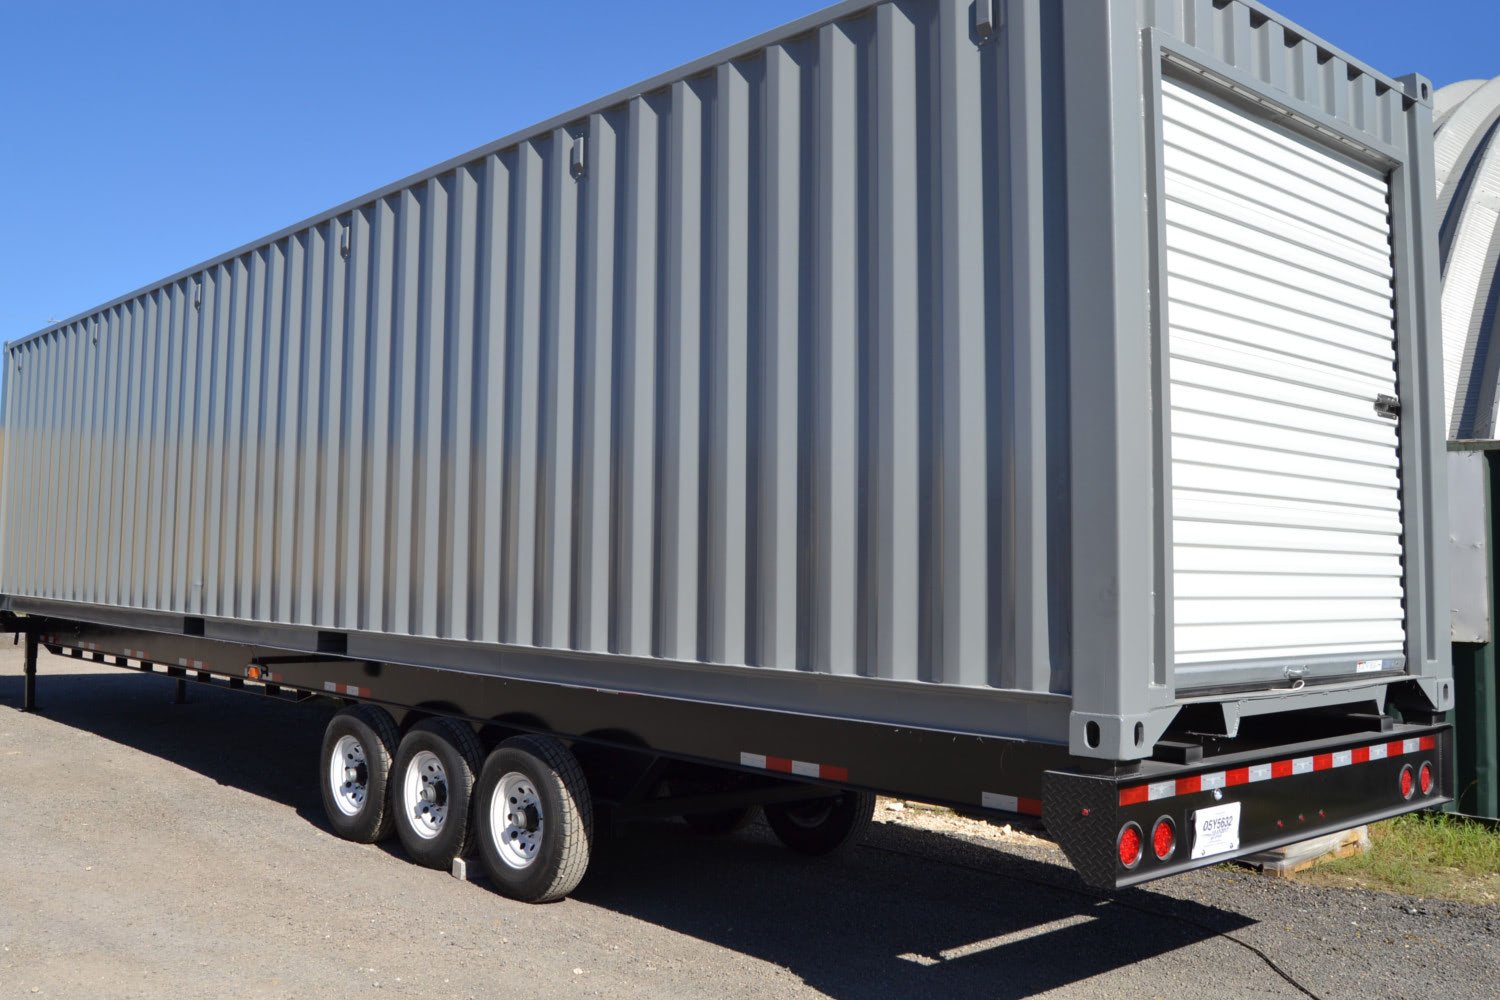 Container accessory 2: a trailer or chassis